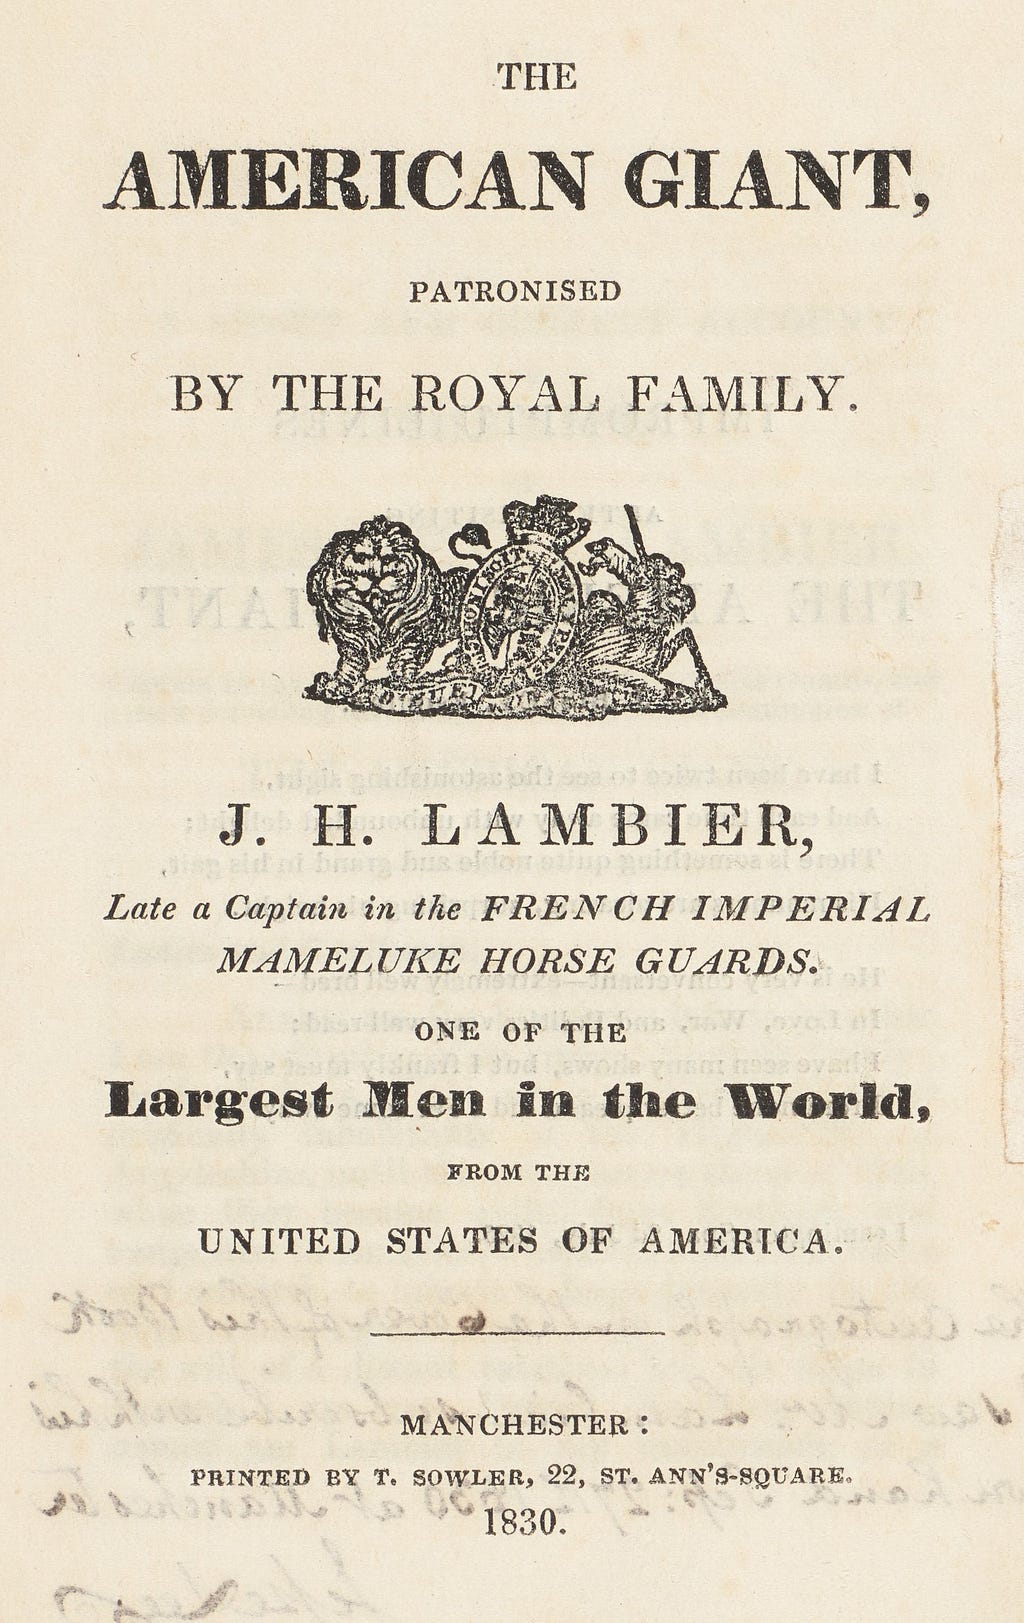 Title-page printed mainly in capitals, in a range of fonts including some in bold, with a woodcut of the Royal coat of arms.